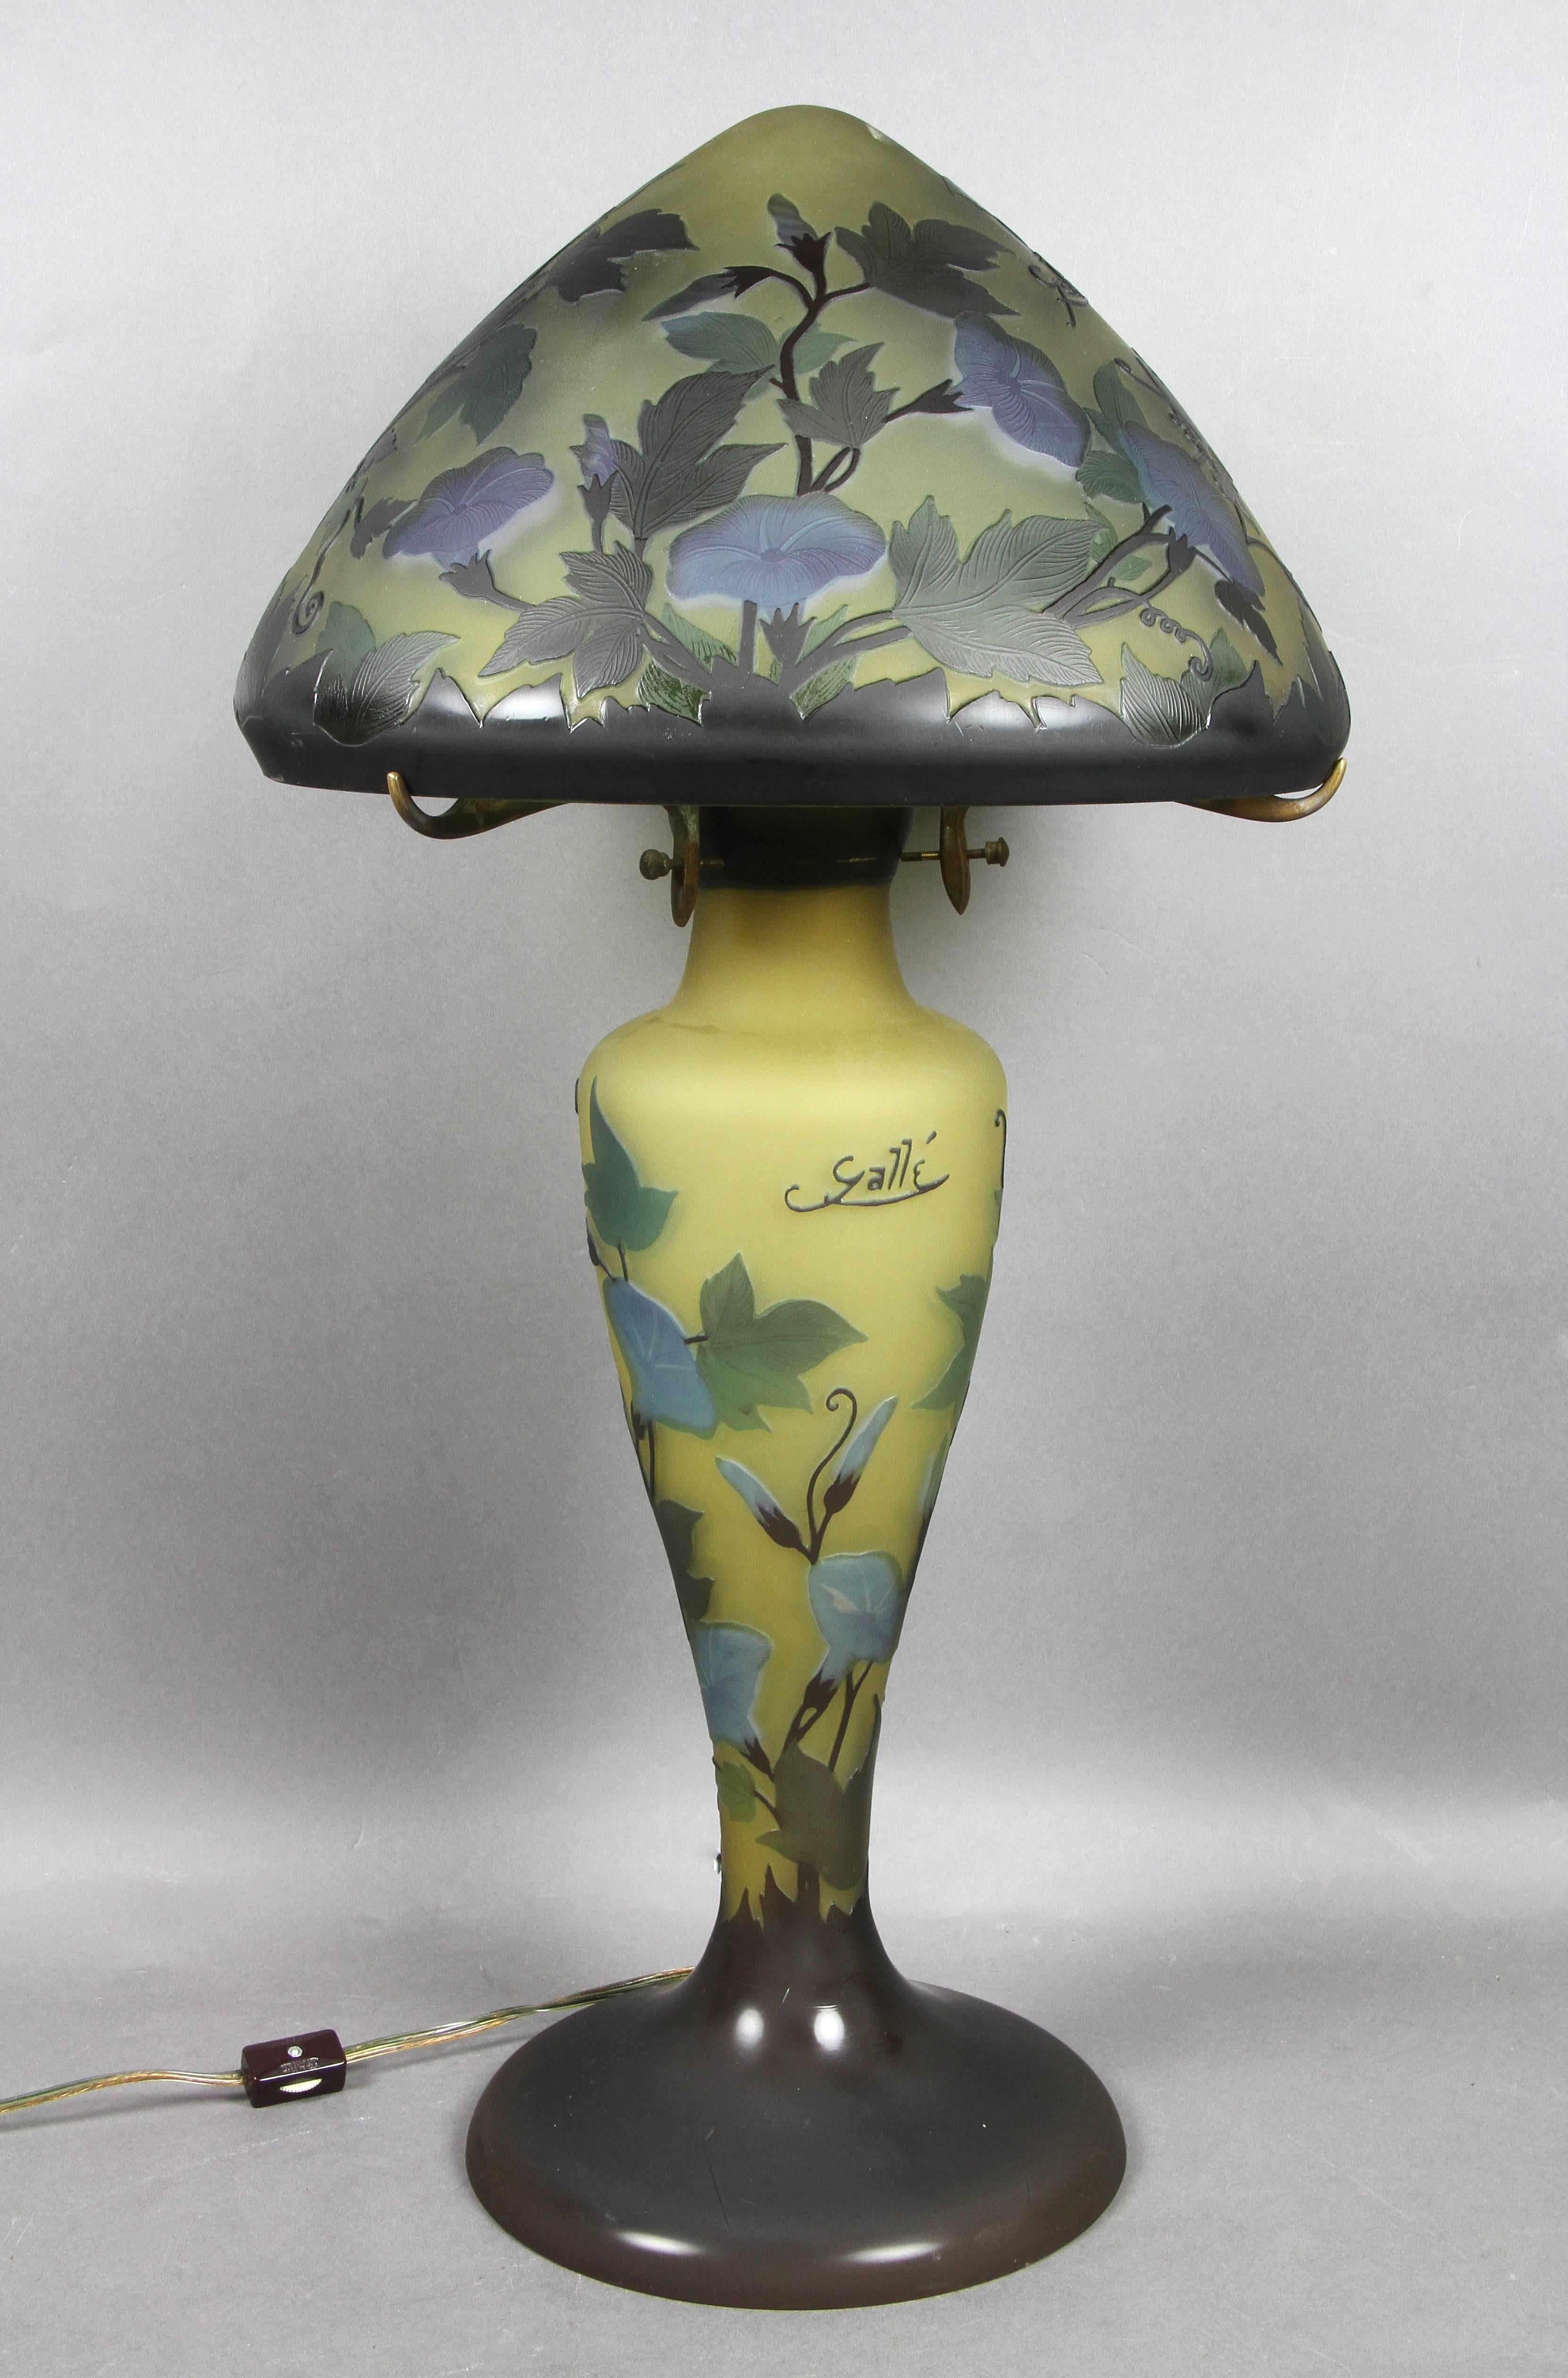 Original Art Noveau glass table lamp by Emile Galle with signature. Etched glass, featuring a floral pattern.